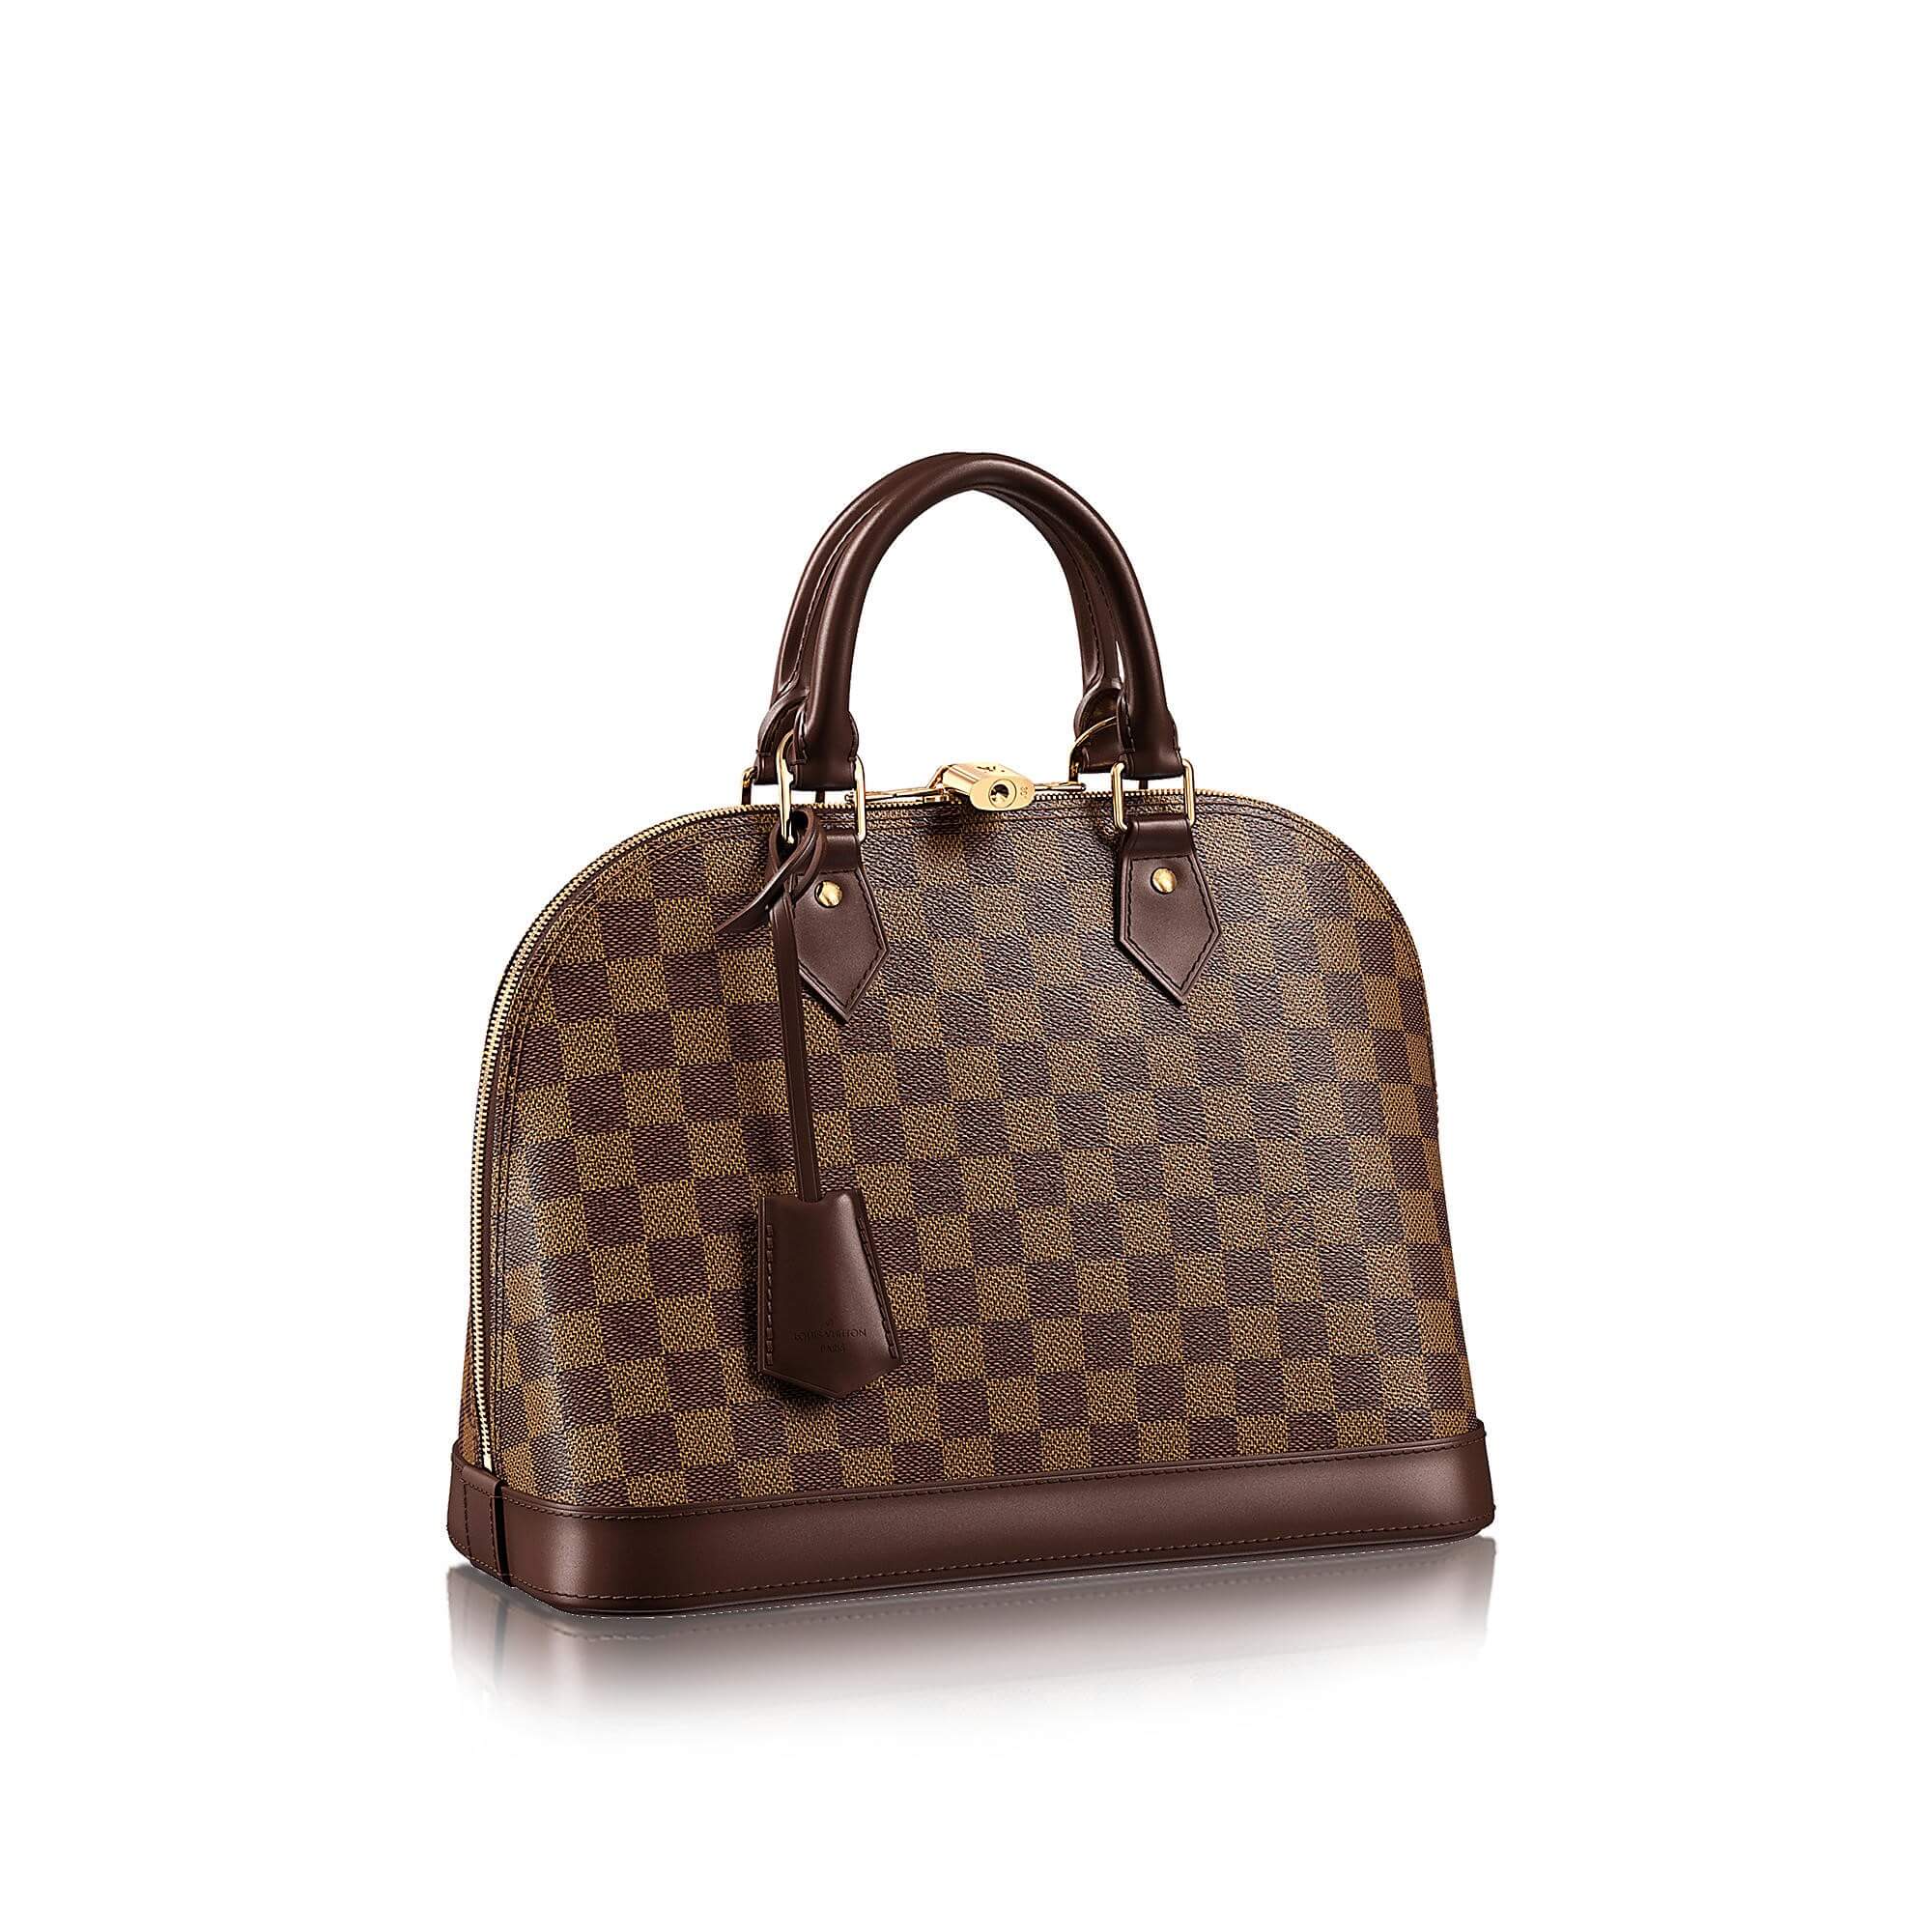 The Most Iconic Louis Vuitton Bags With The Best Stories! | Luxity